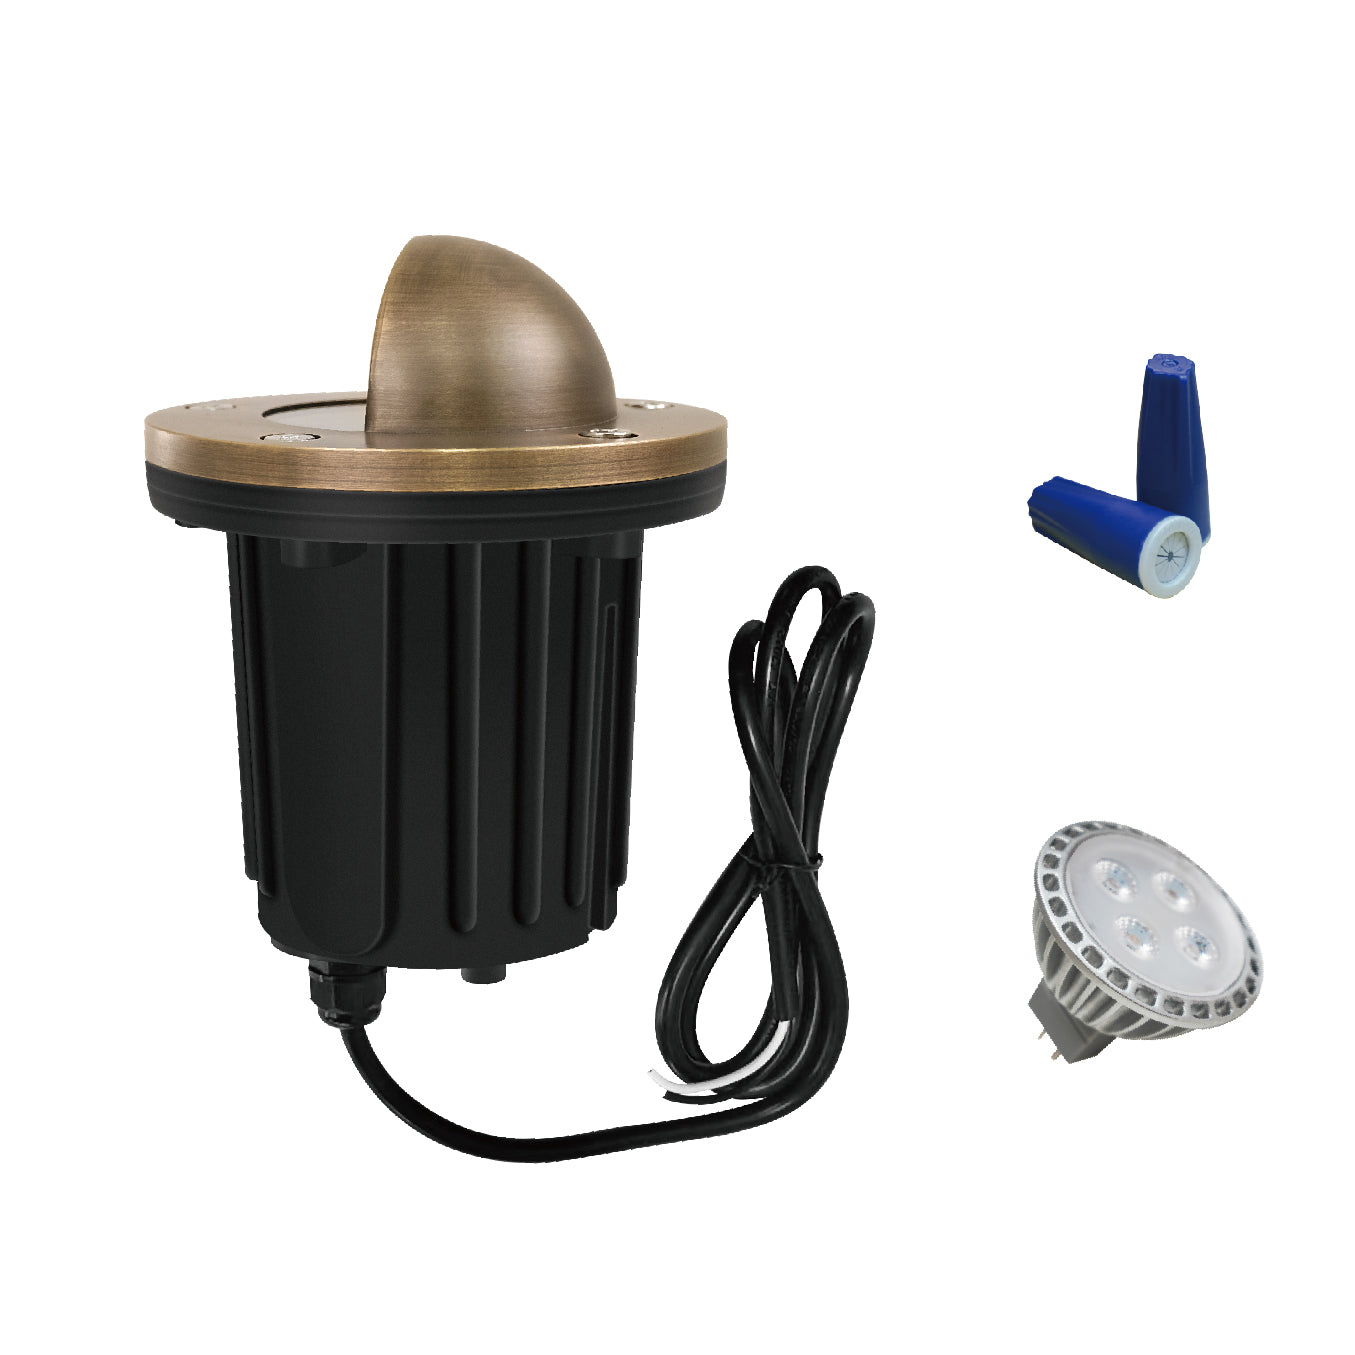 Low Voltage Brass Beacon Top Well Light, 12V AC/DC, 5W, IP67 Rated, 140Lm, 2700K (MR16)